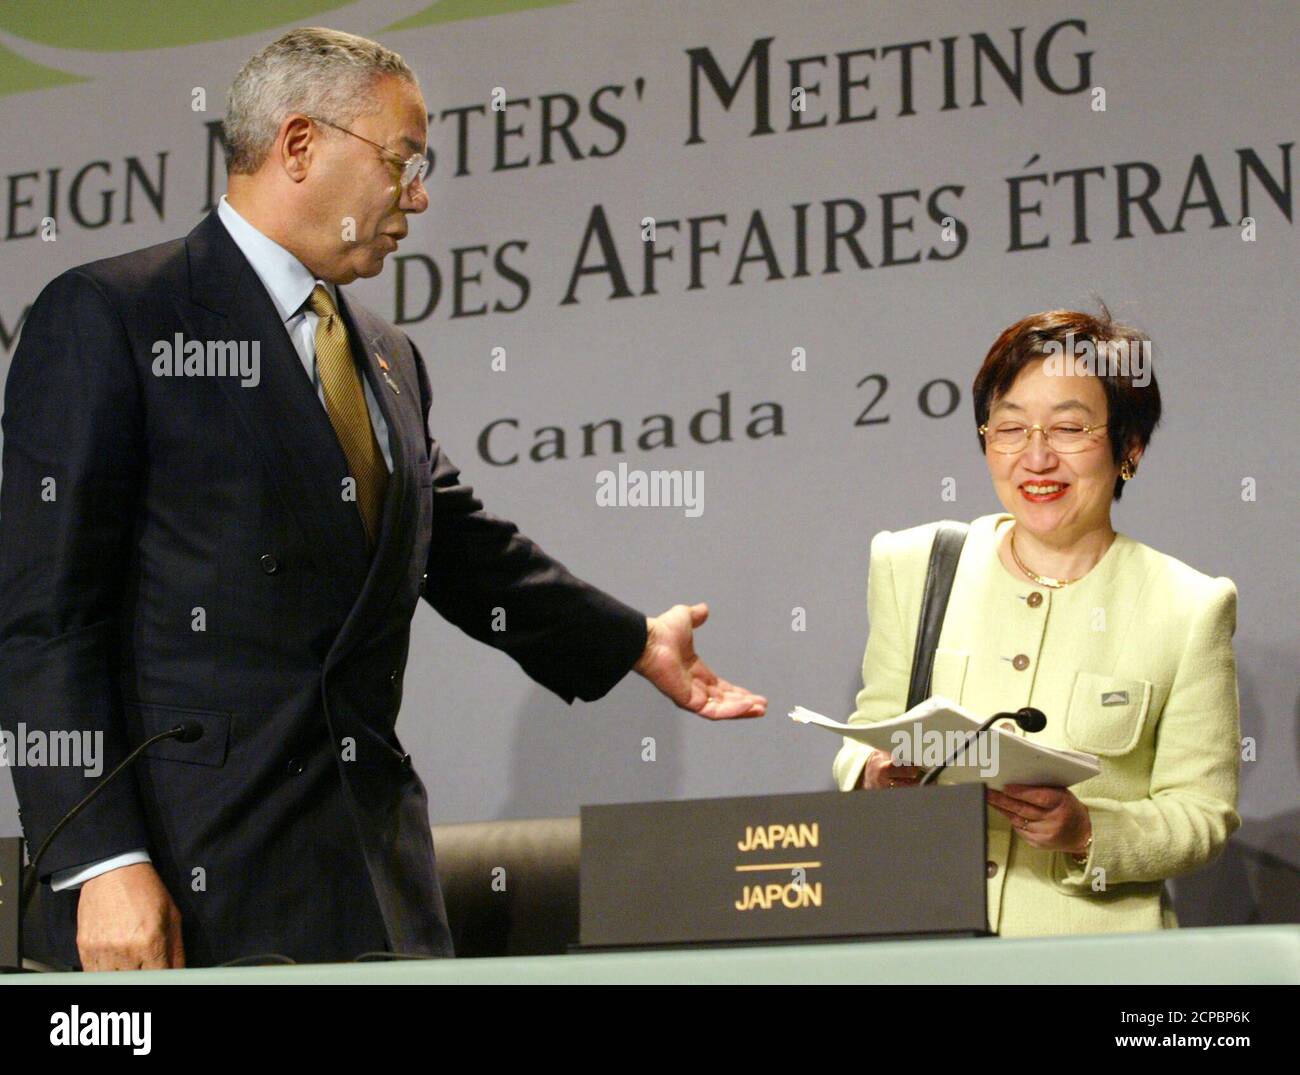 United States Secretary of State Colin Powell helps Japanese Foreign Minister Yoriko Kawaguchi to her seat prior to a closing news conference at the G8 Foreing Ministers meeting in Whistler, British Columbia June 13, 2002. The ministers held two days of talks just ahead of the G8 Leaders meeting later this month. REUTERS/Andy Clark  AC Stock Photo